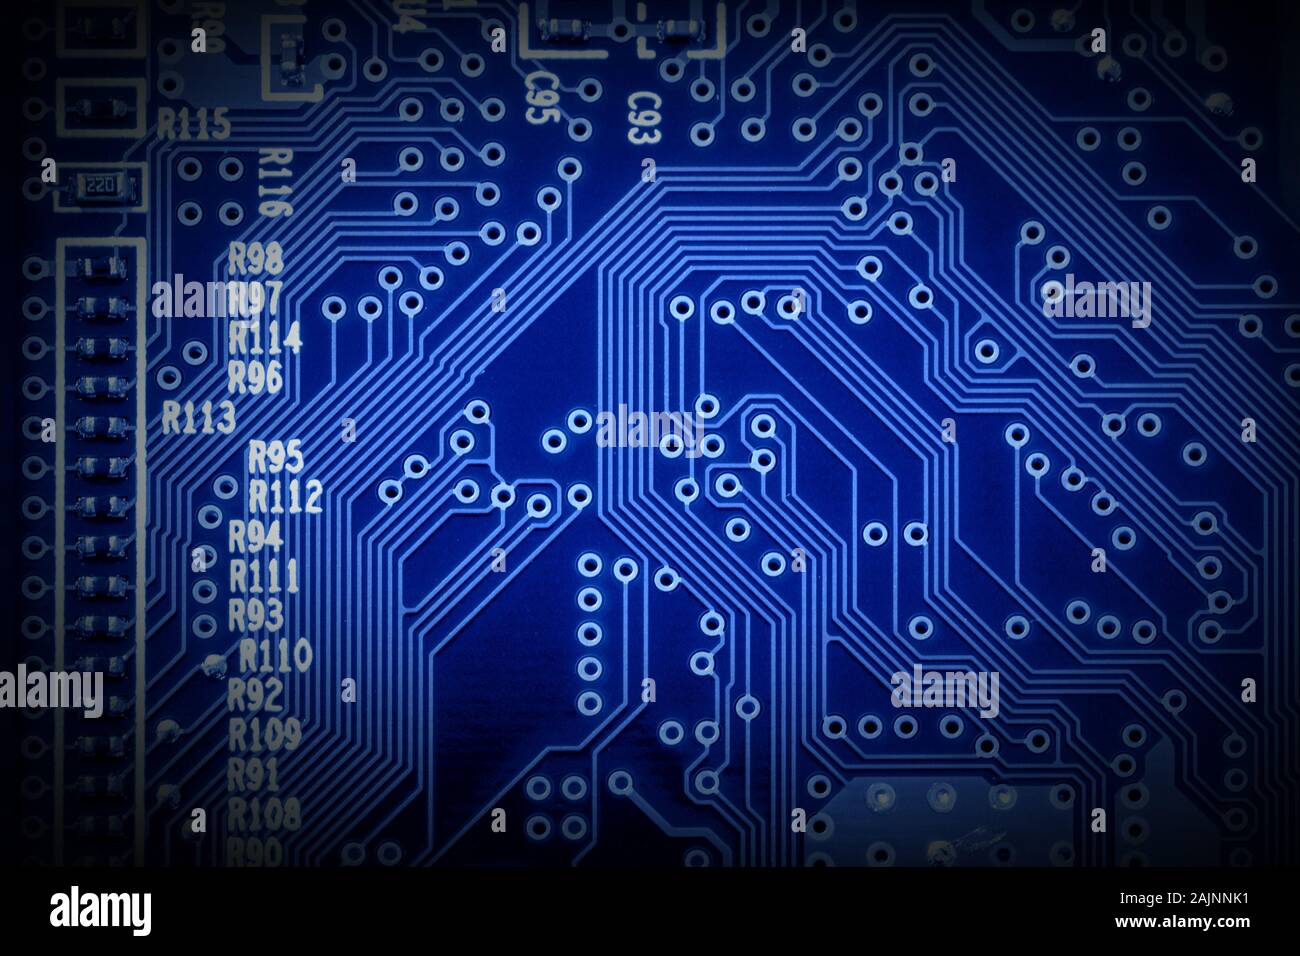 Modern microchip technology background of a printed circuit board, or PCB Stock Photo